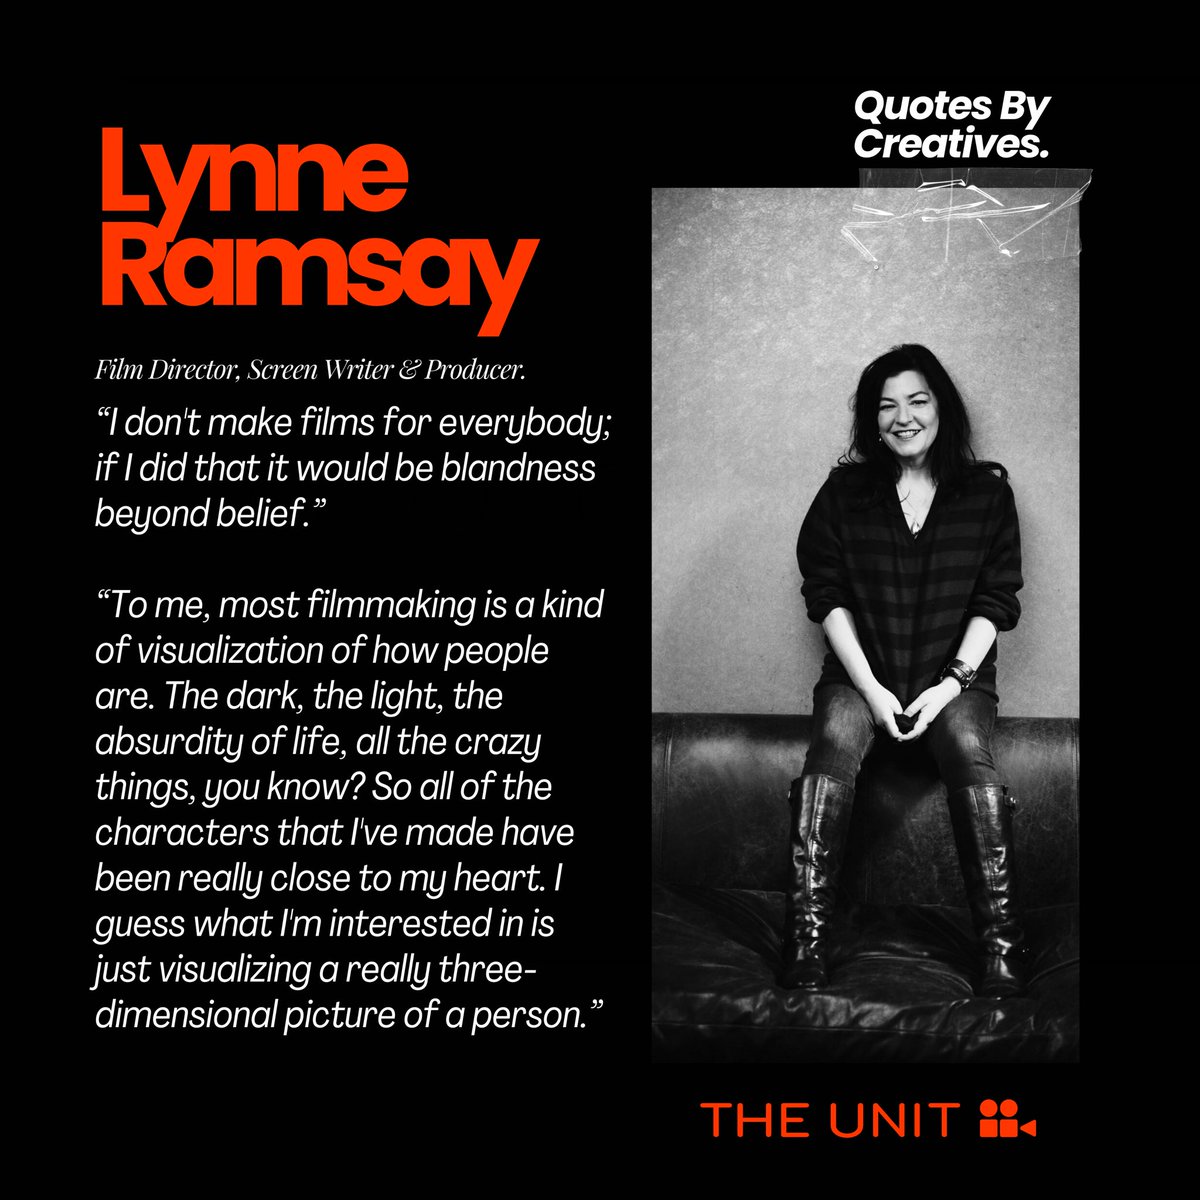 The Five Minute Film Club is back and we’ve got a fantastic quote from the legendary Lynne Ramsay to get your juices flowing! 🎬 Submit your entries via: unit.bradford@gmail.com Deadline: Midnight - 28.02.24. Screening: The Stockroom Cinema - 6PM - 29.02.24.